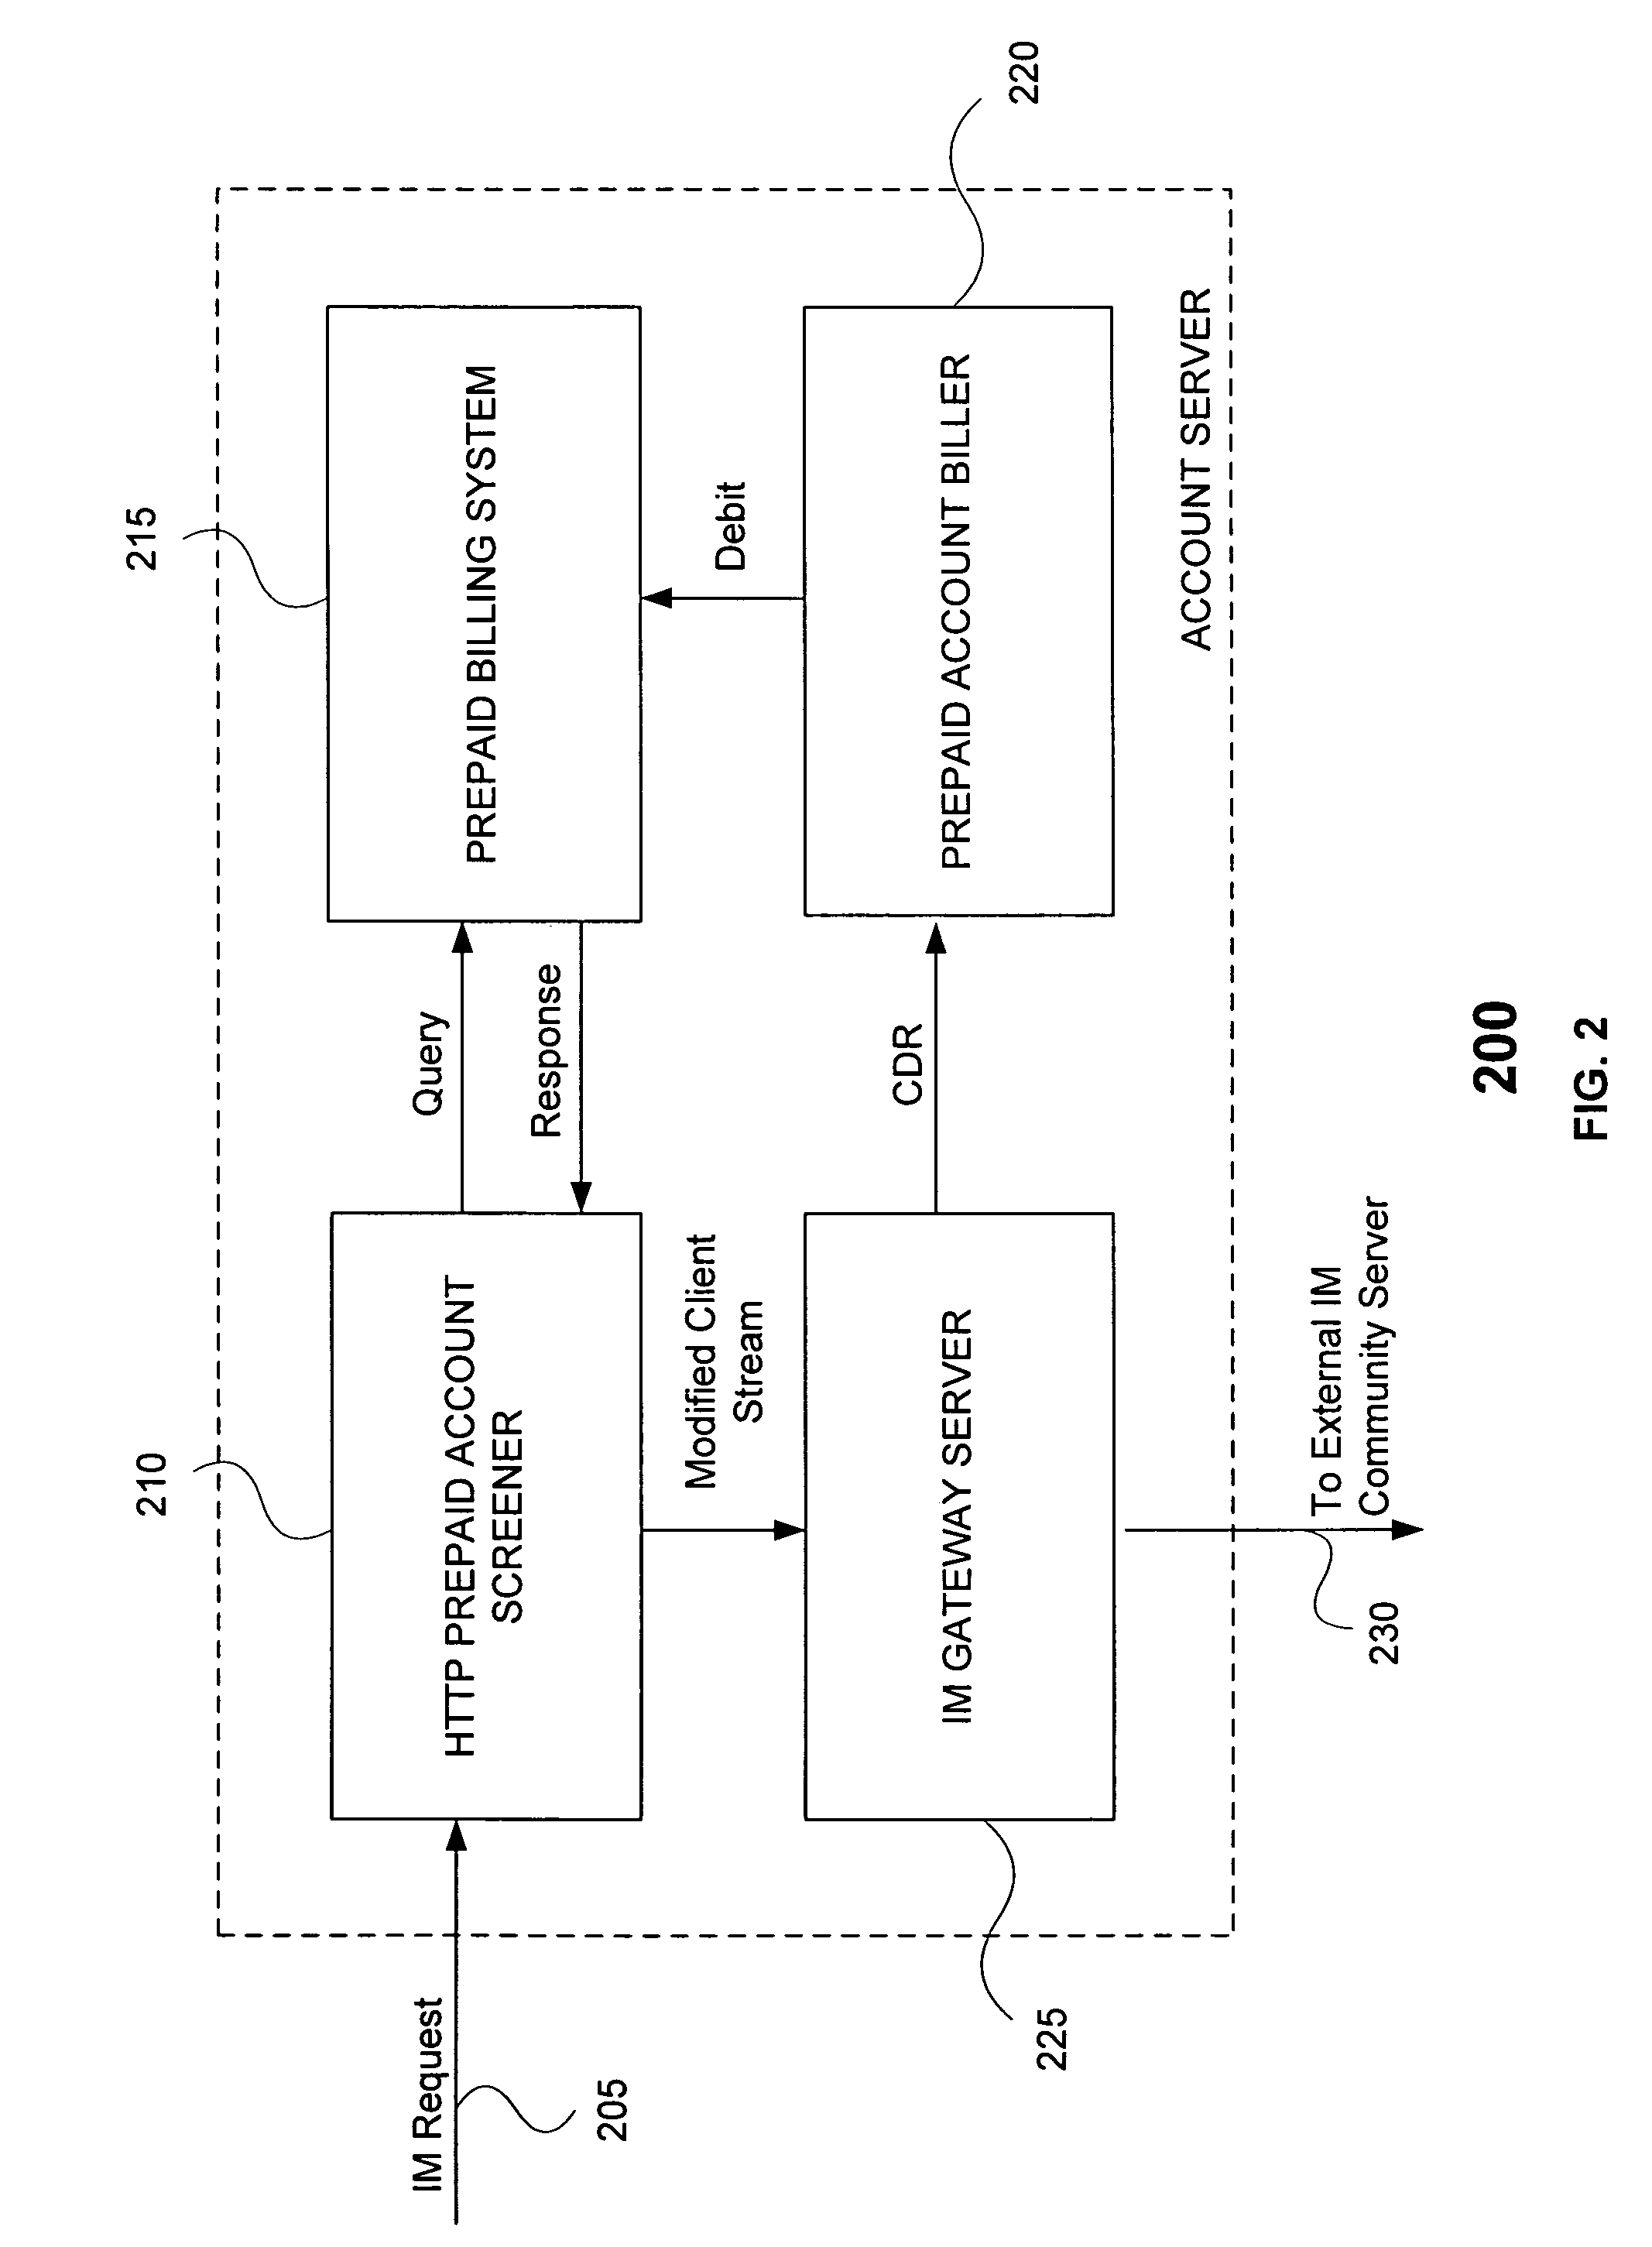 System and method for providing prepaid billing for instant messaging users